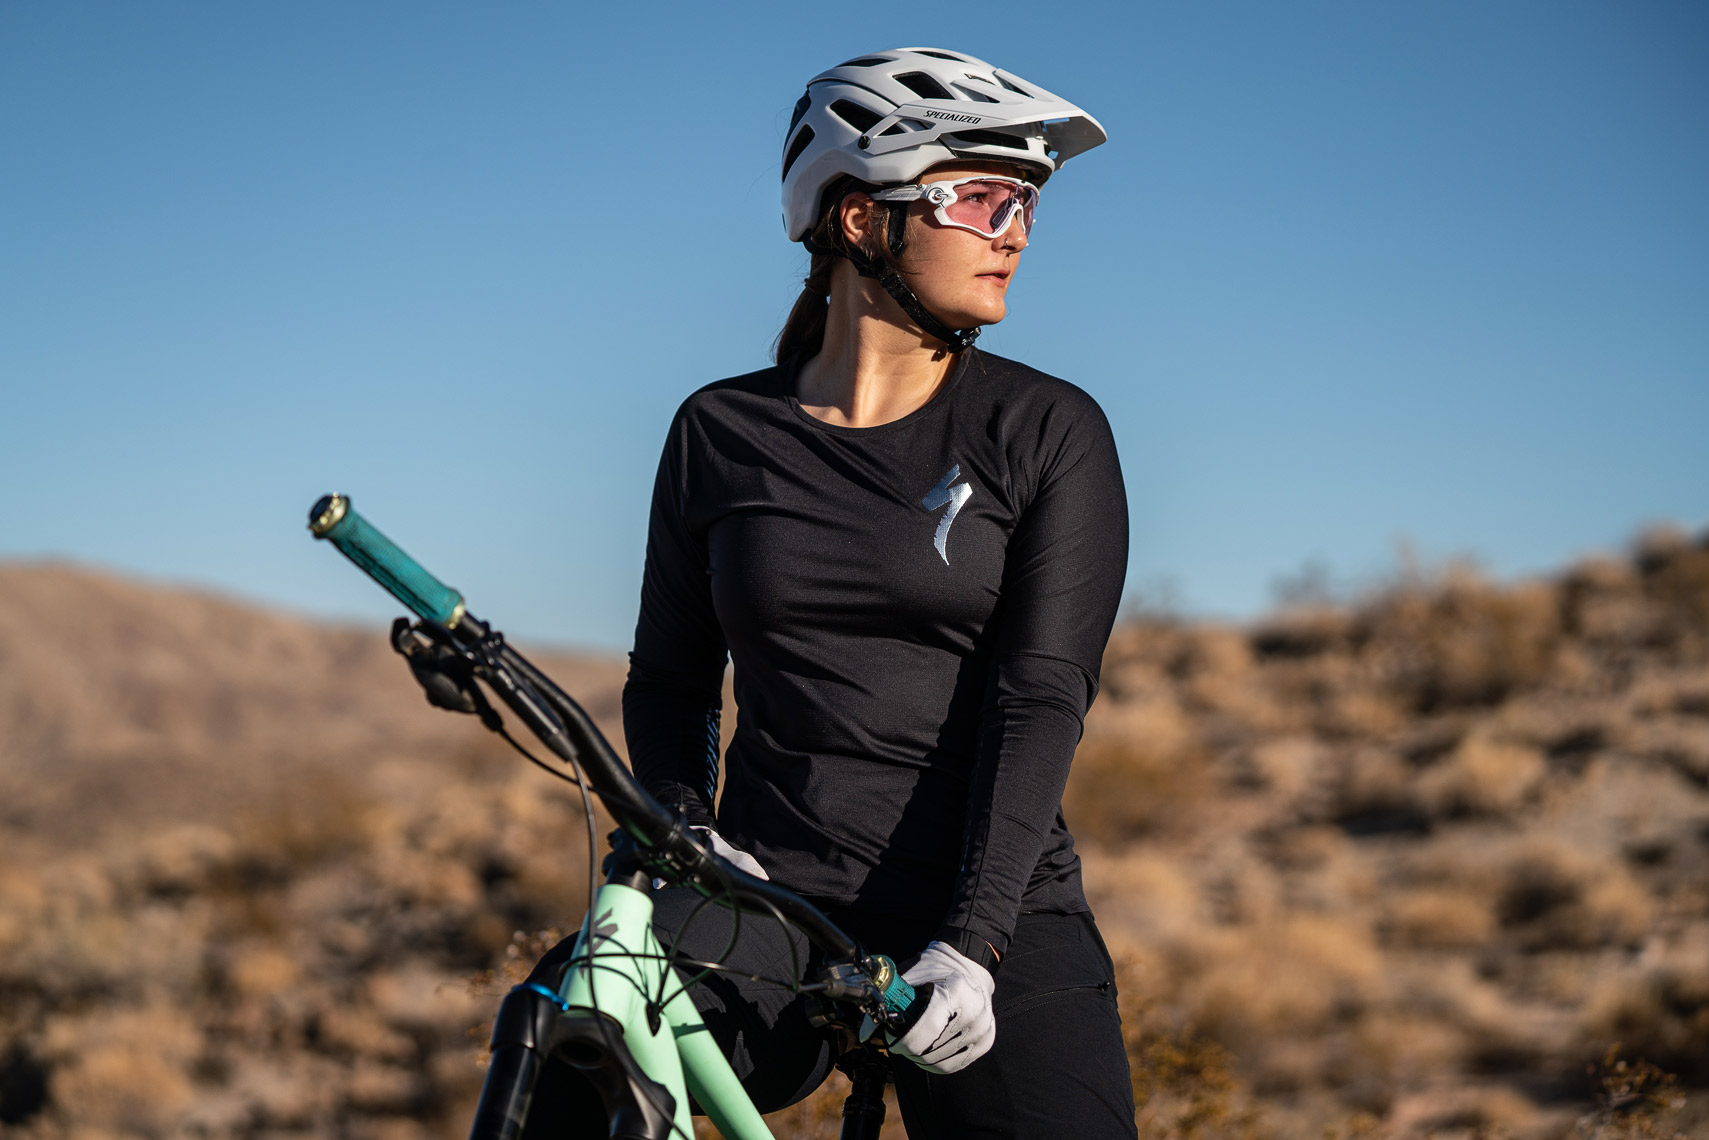 Specialized_S21_MTB_Clothing_Palm_Springs_VanWeelden-323